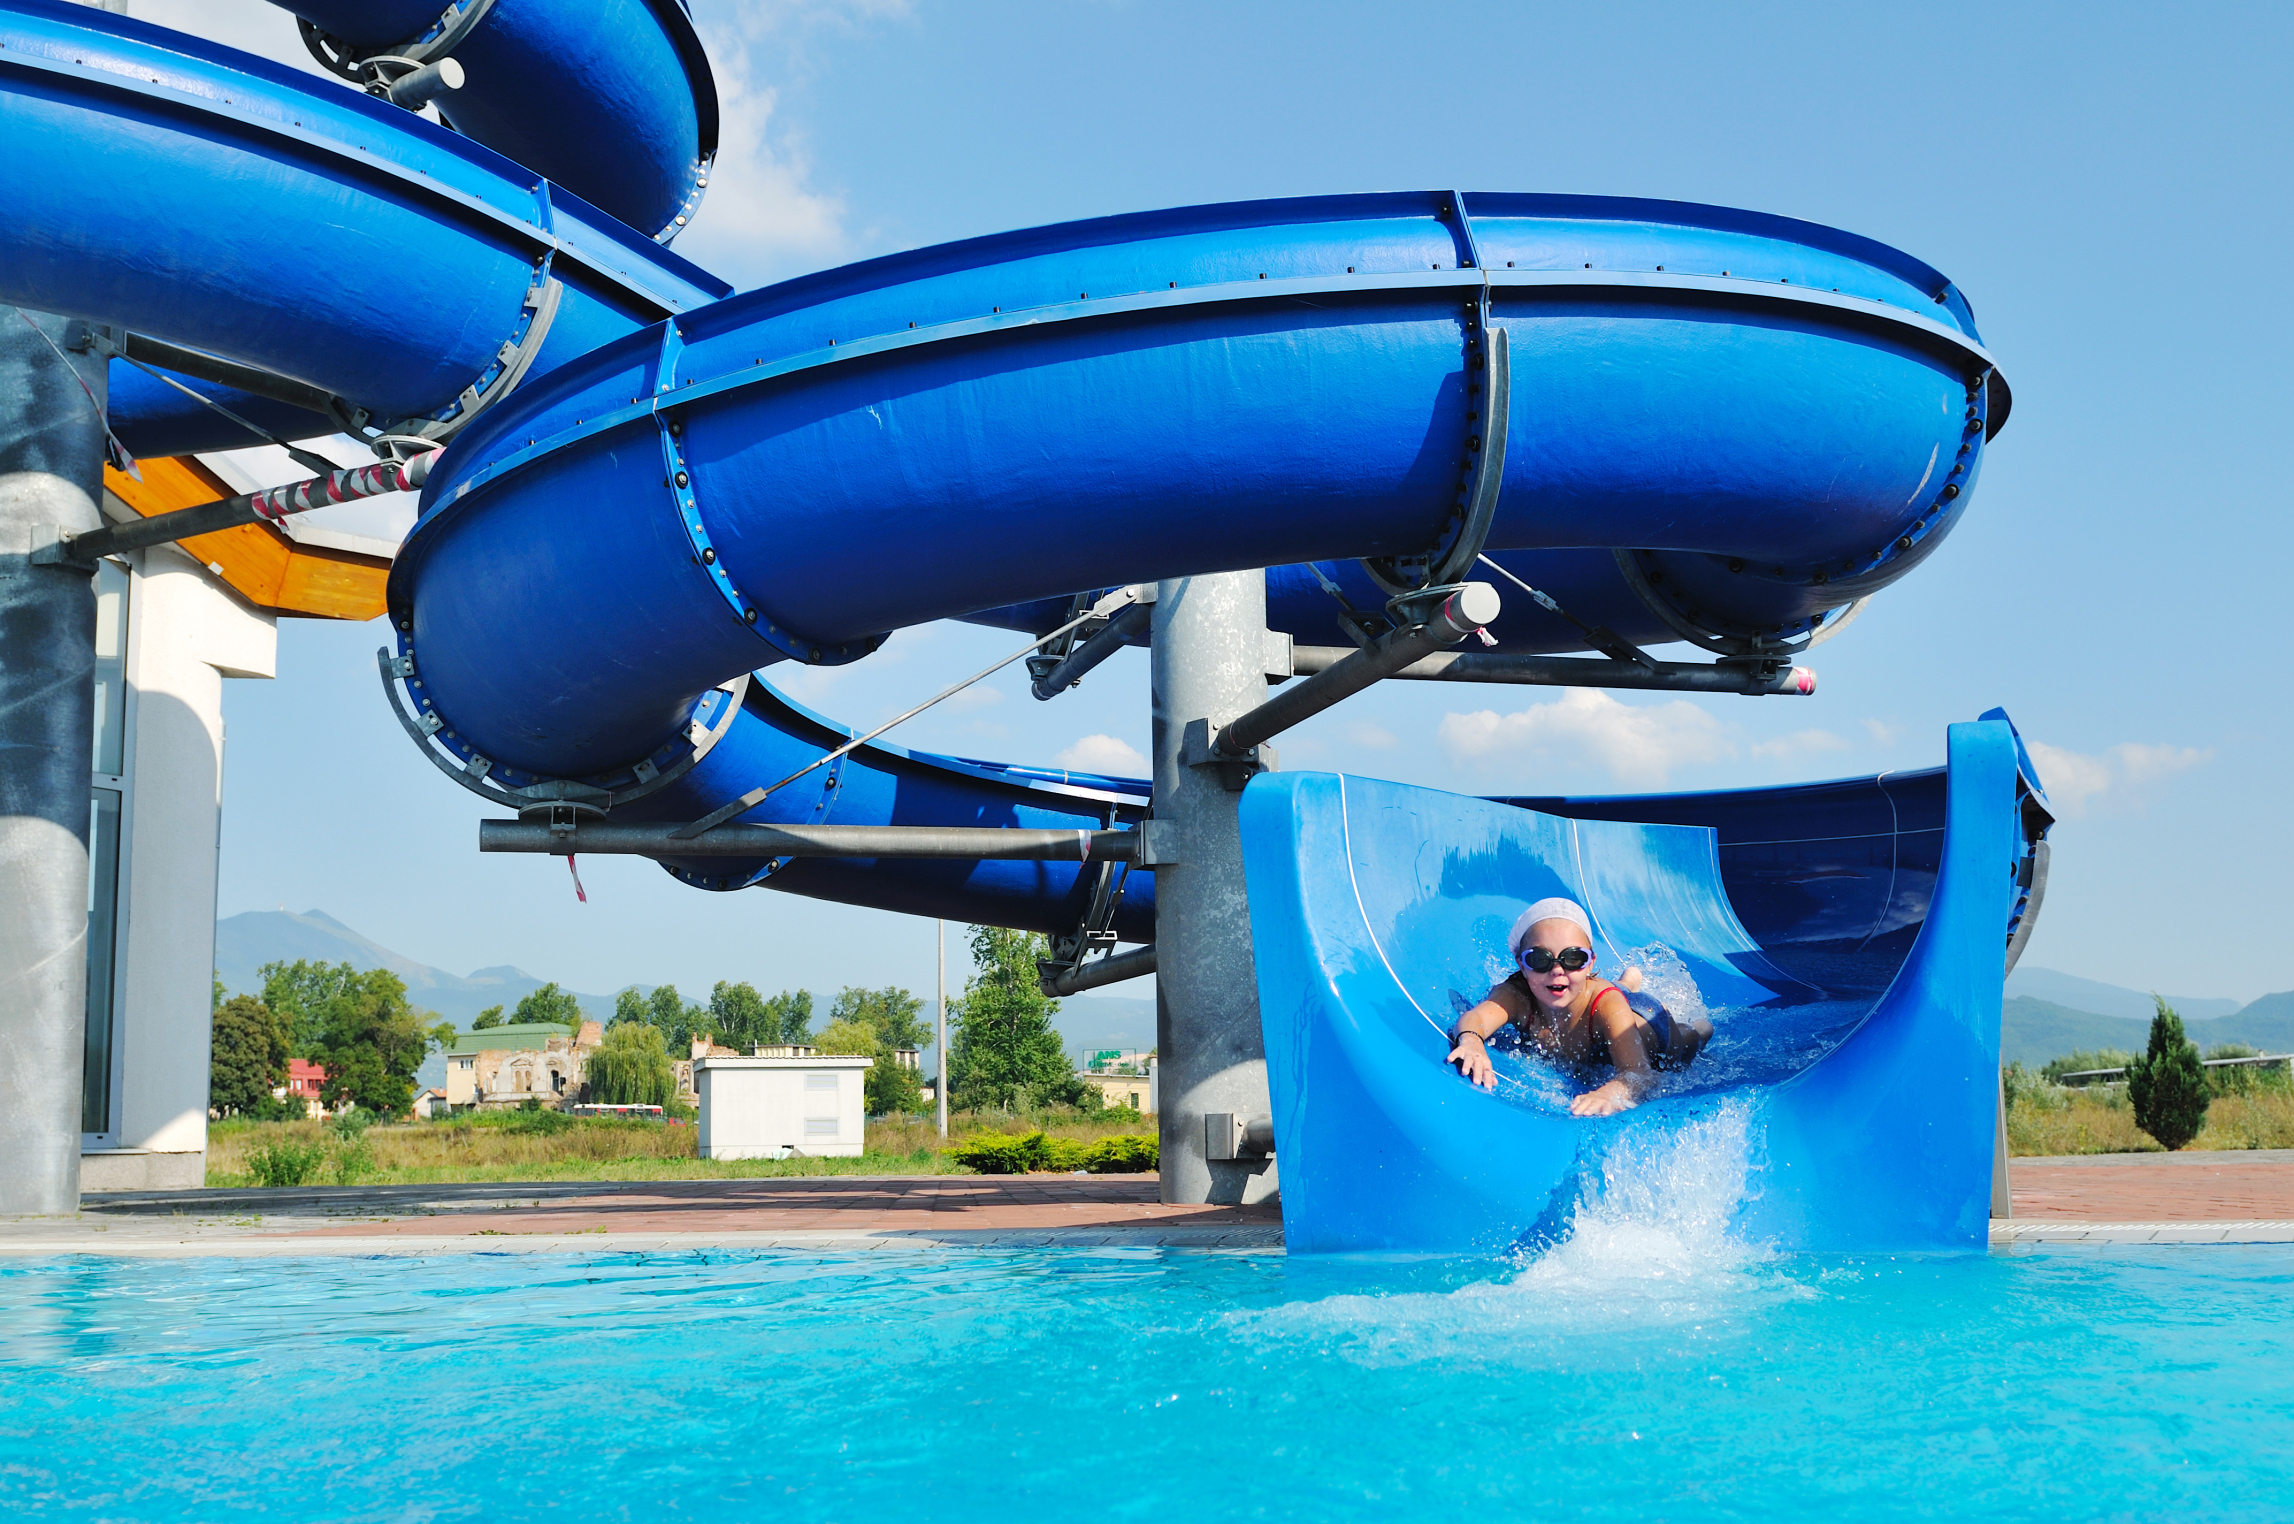 A kid about to shoot out of a curling waterslide.